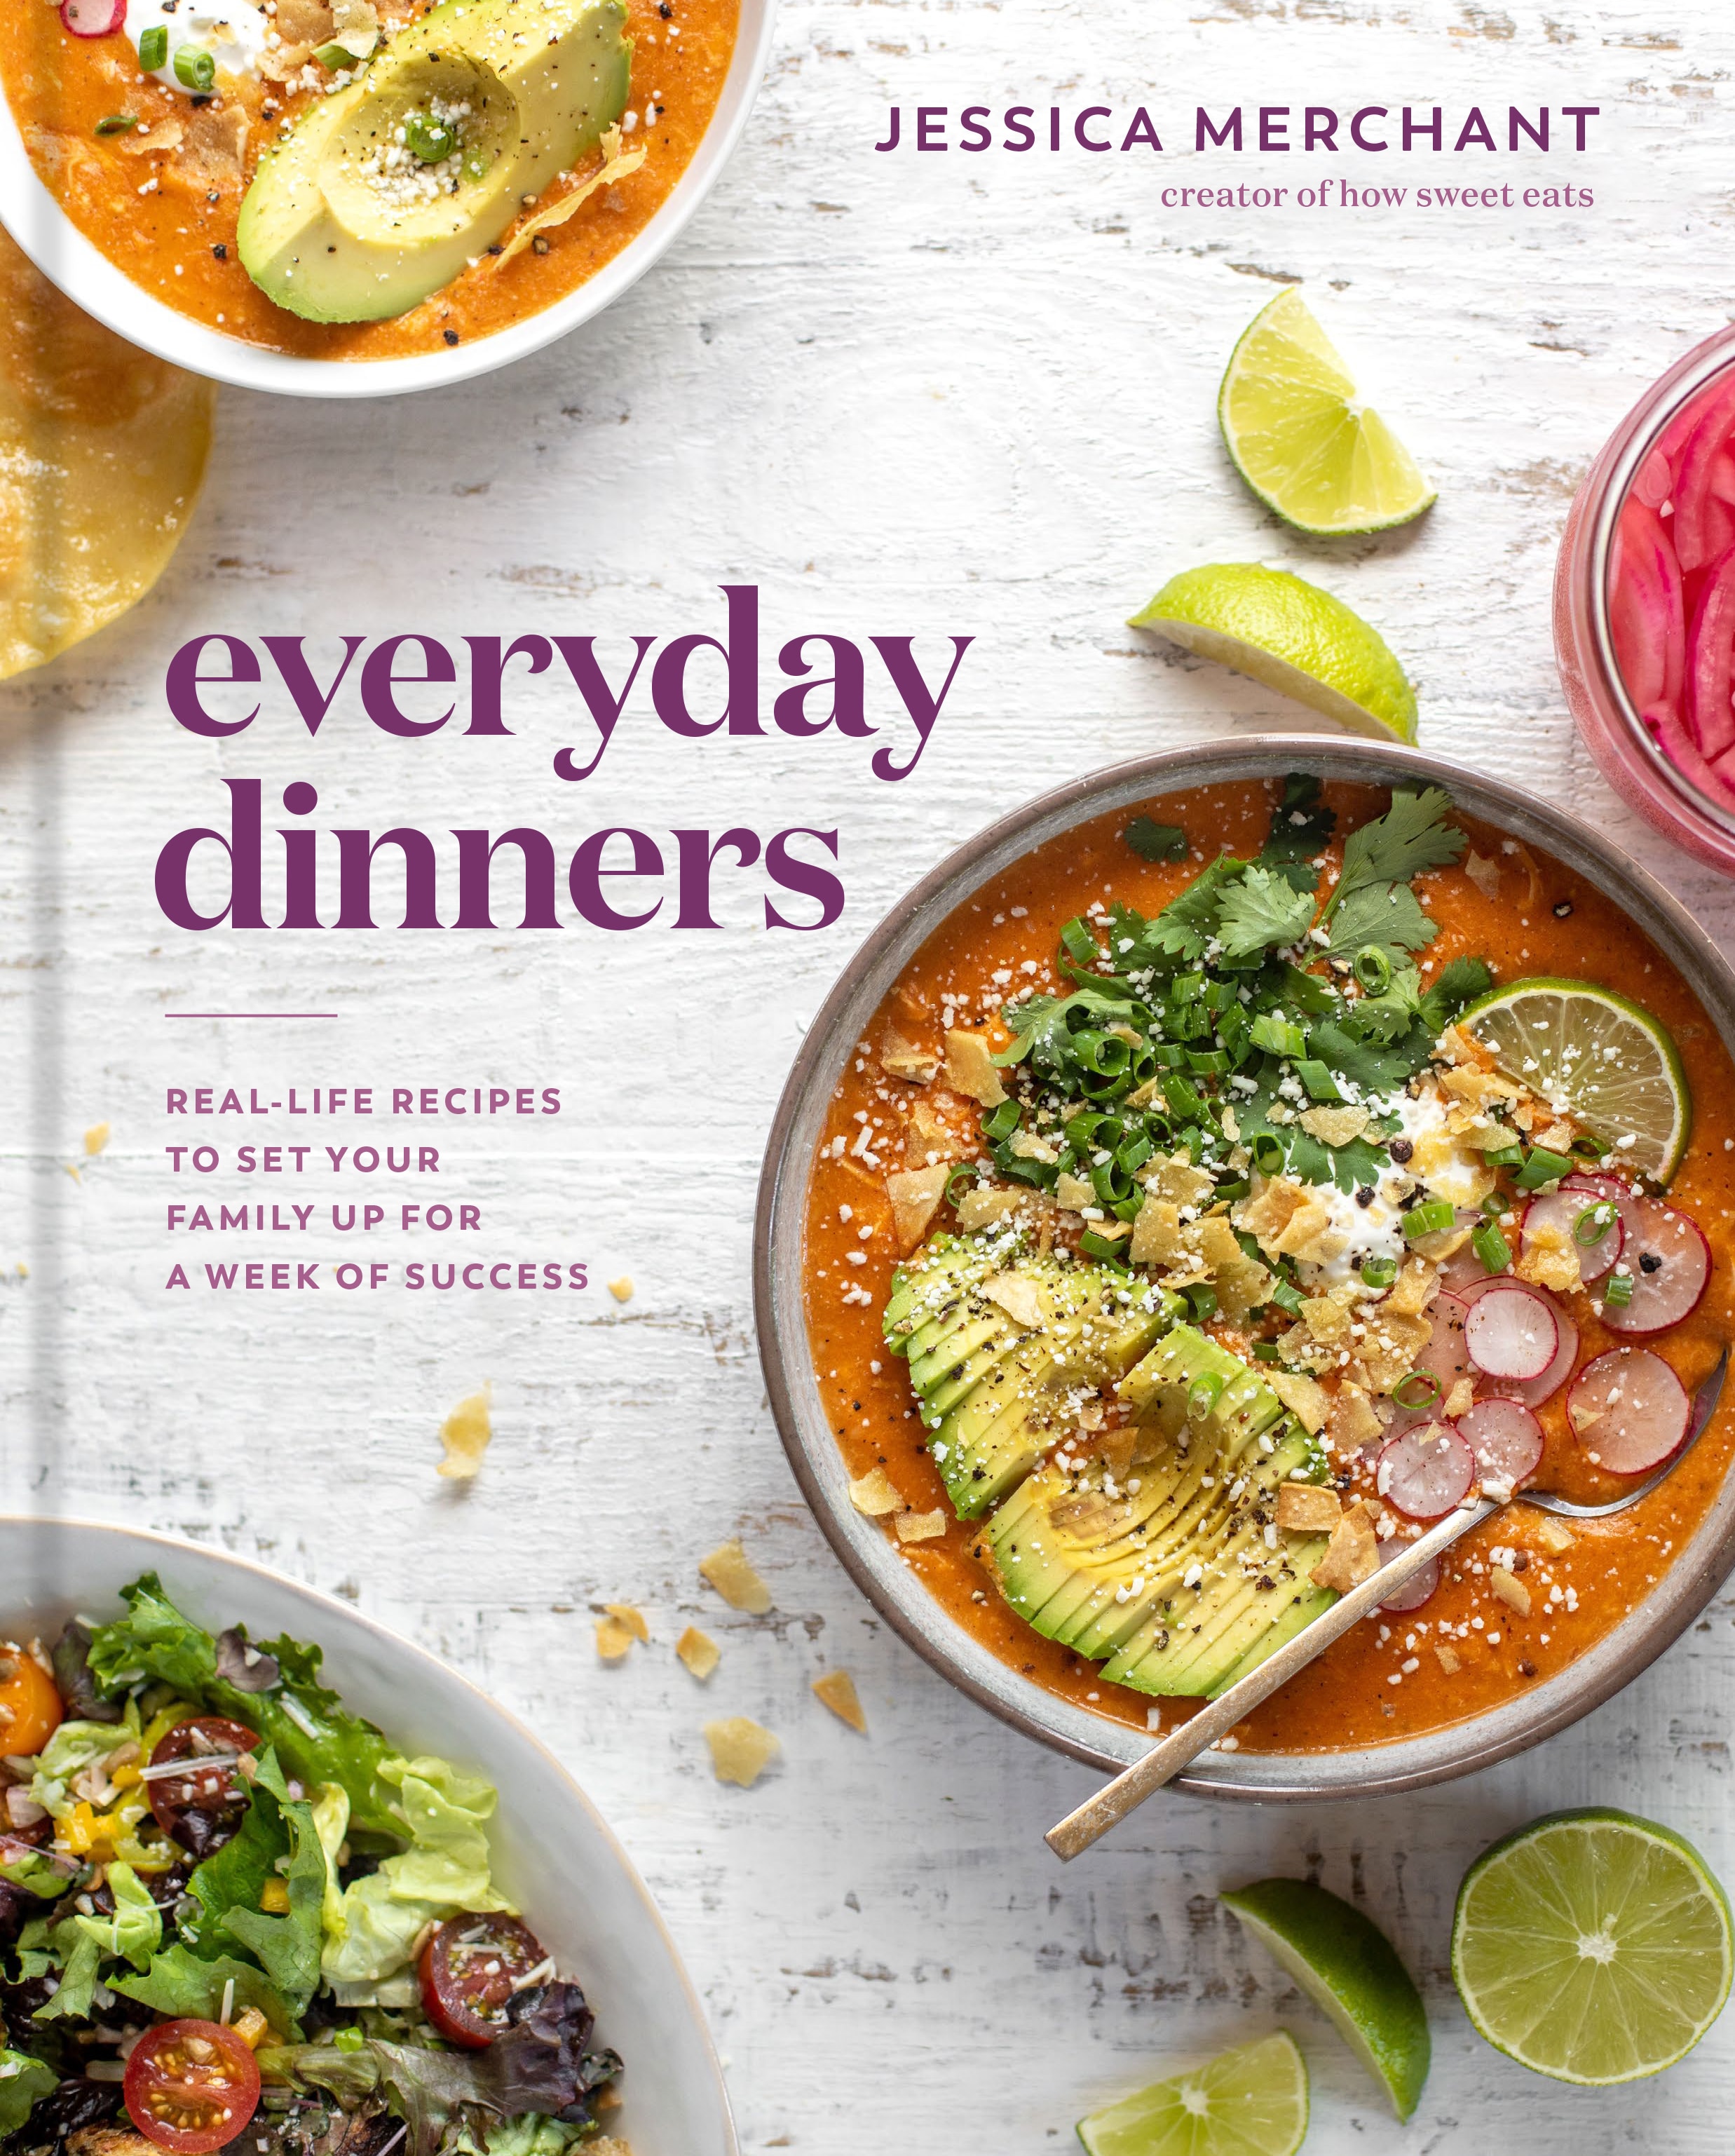 order a signed copy of everyday dinners!